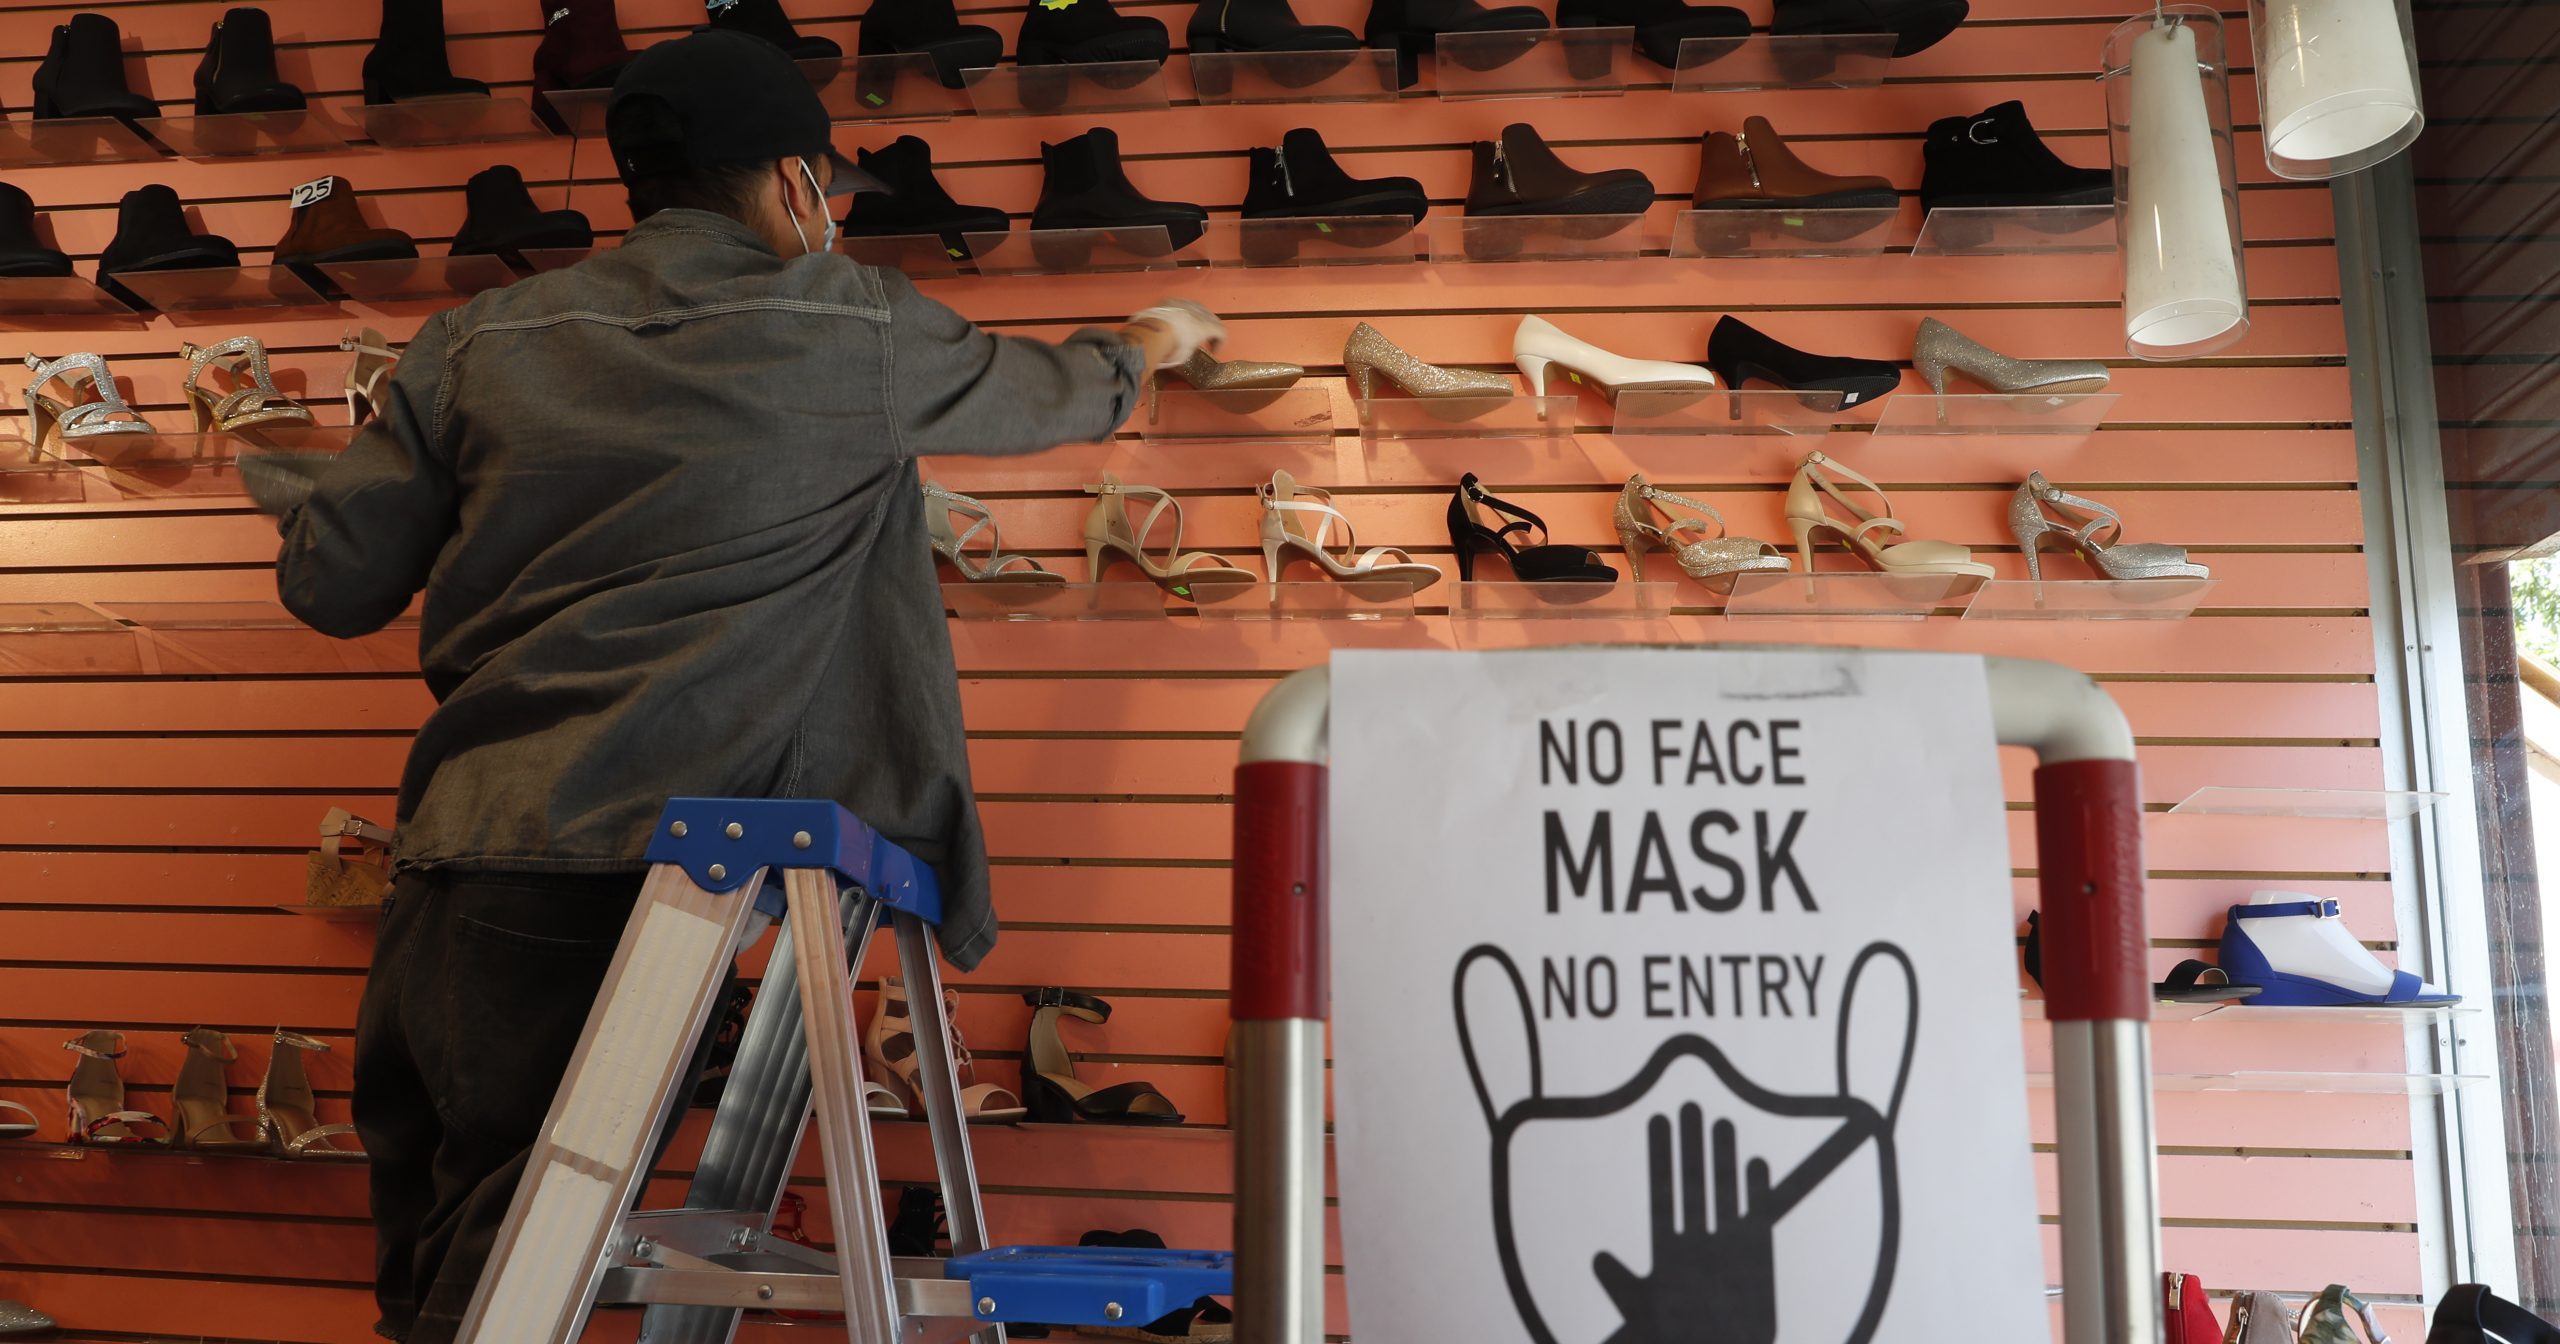 Manager Angel Ramos arranges shoes on a display in Top Shoes in the Brooklyn borough of New York on, June 8, 2020.